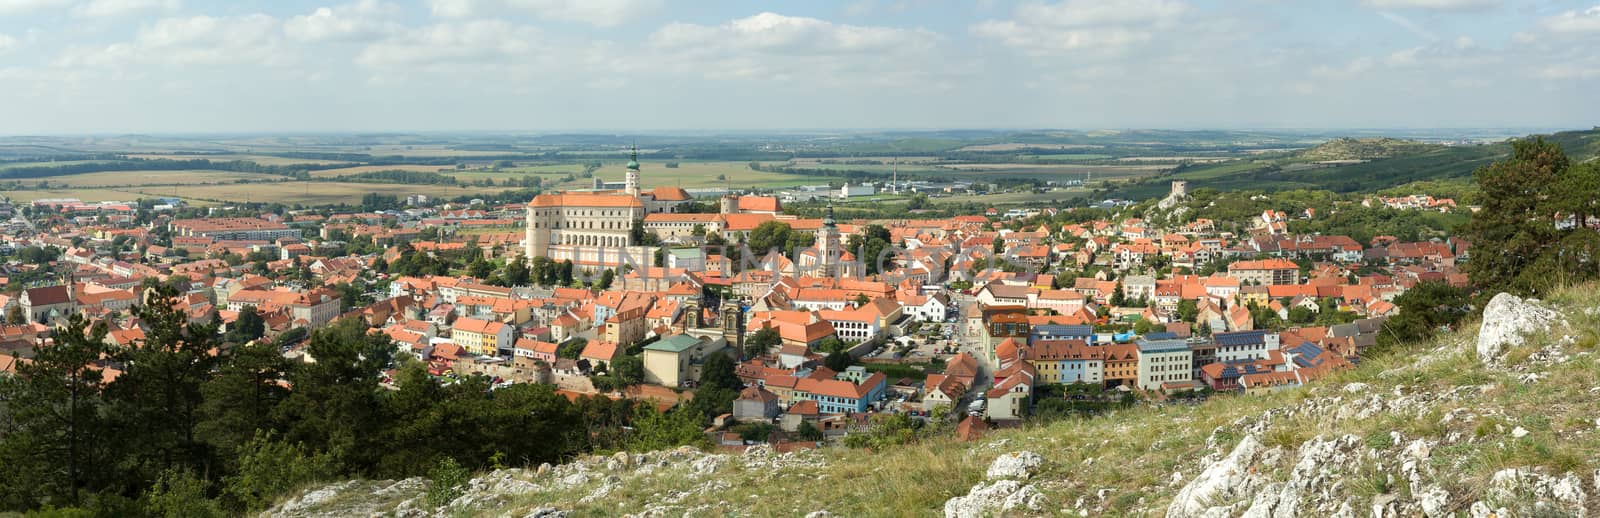 wide panorama of Mikulov, South Moravia, in the Czech Republic